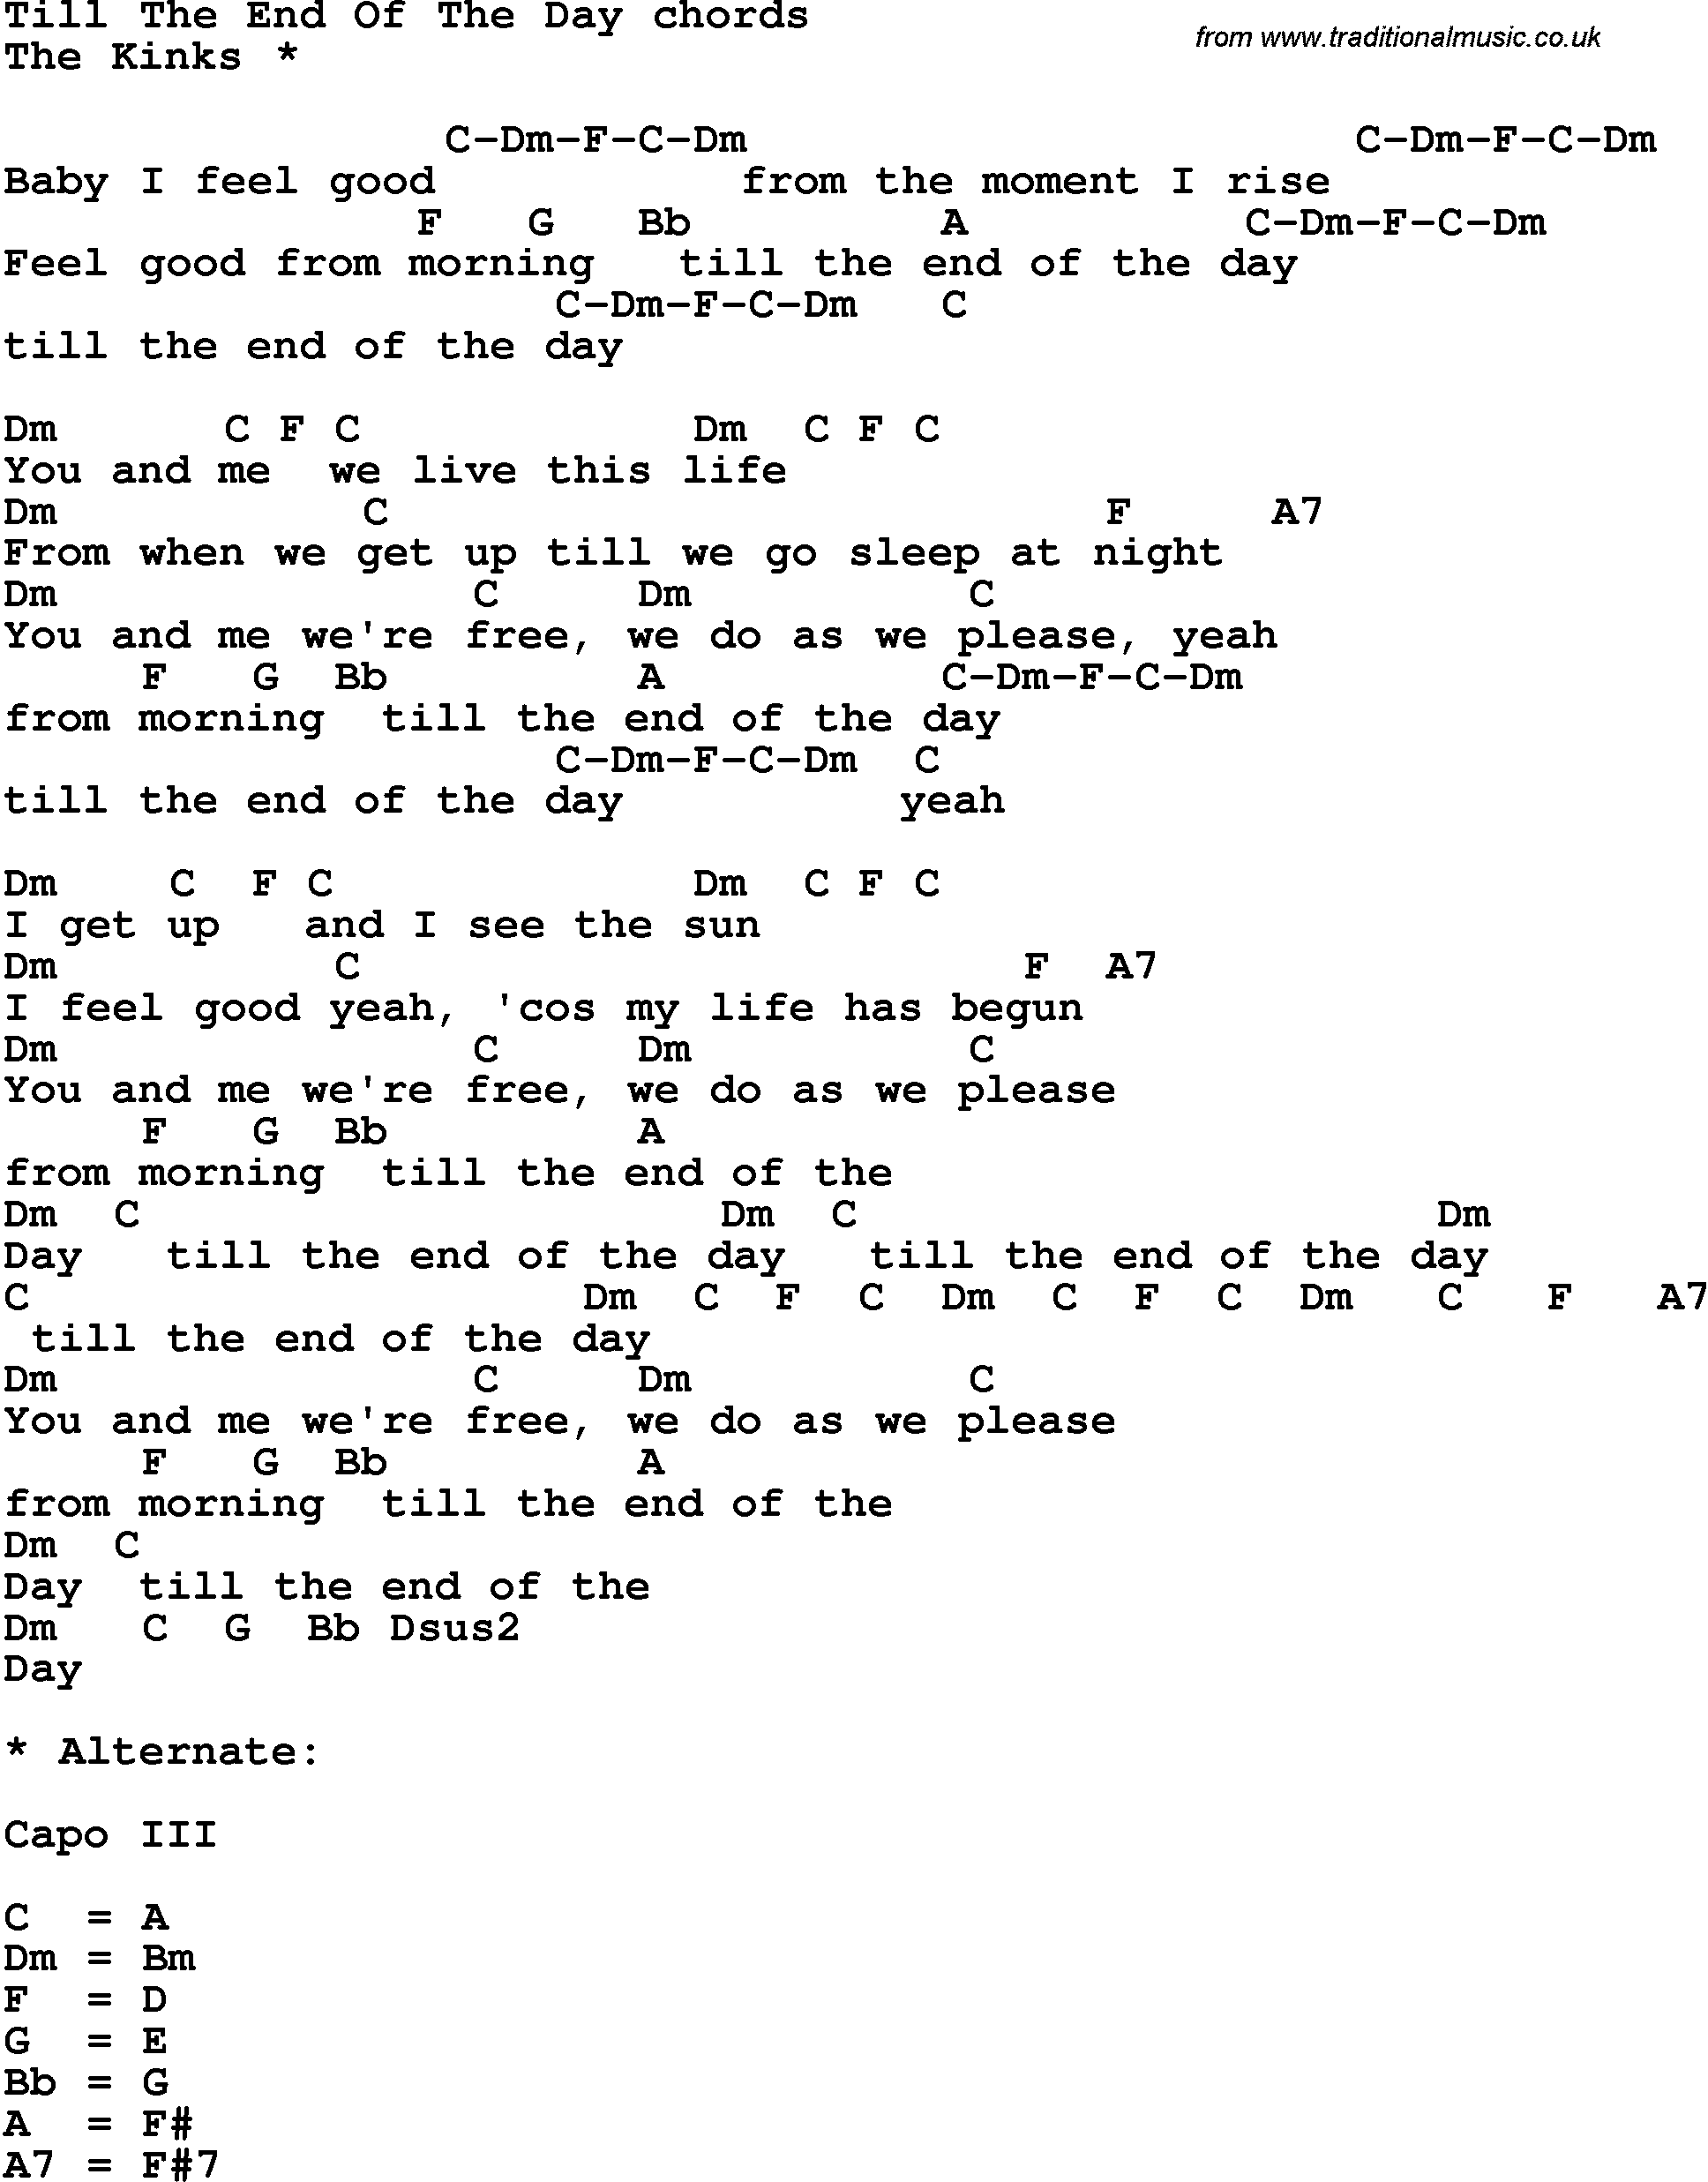 Song Lyrics with guitar chords for Till The End Of The Day